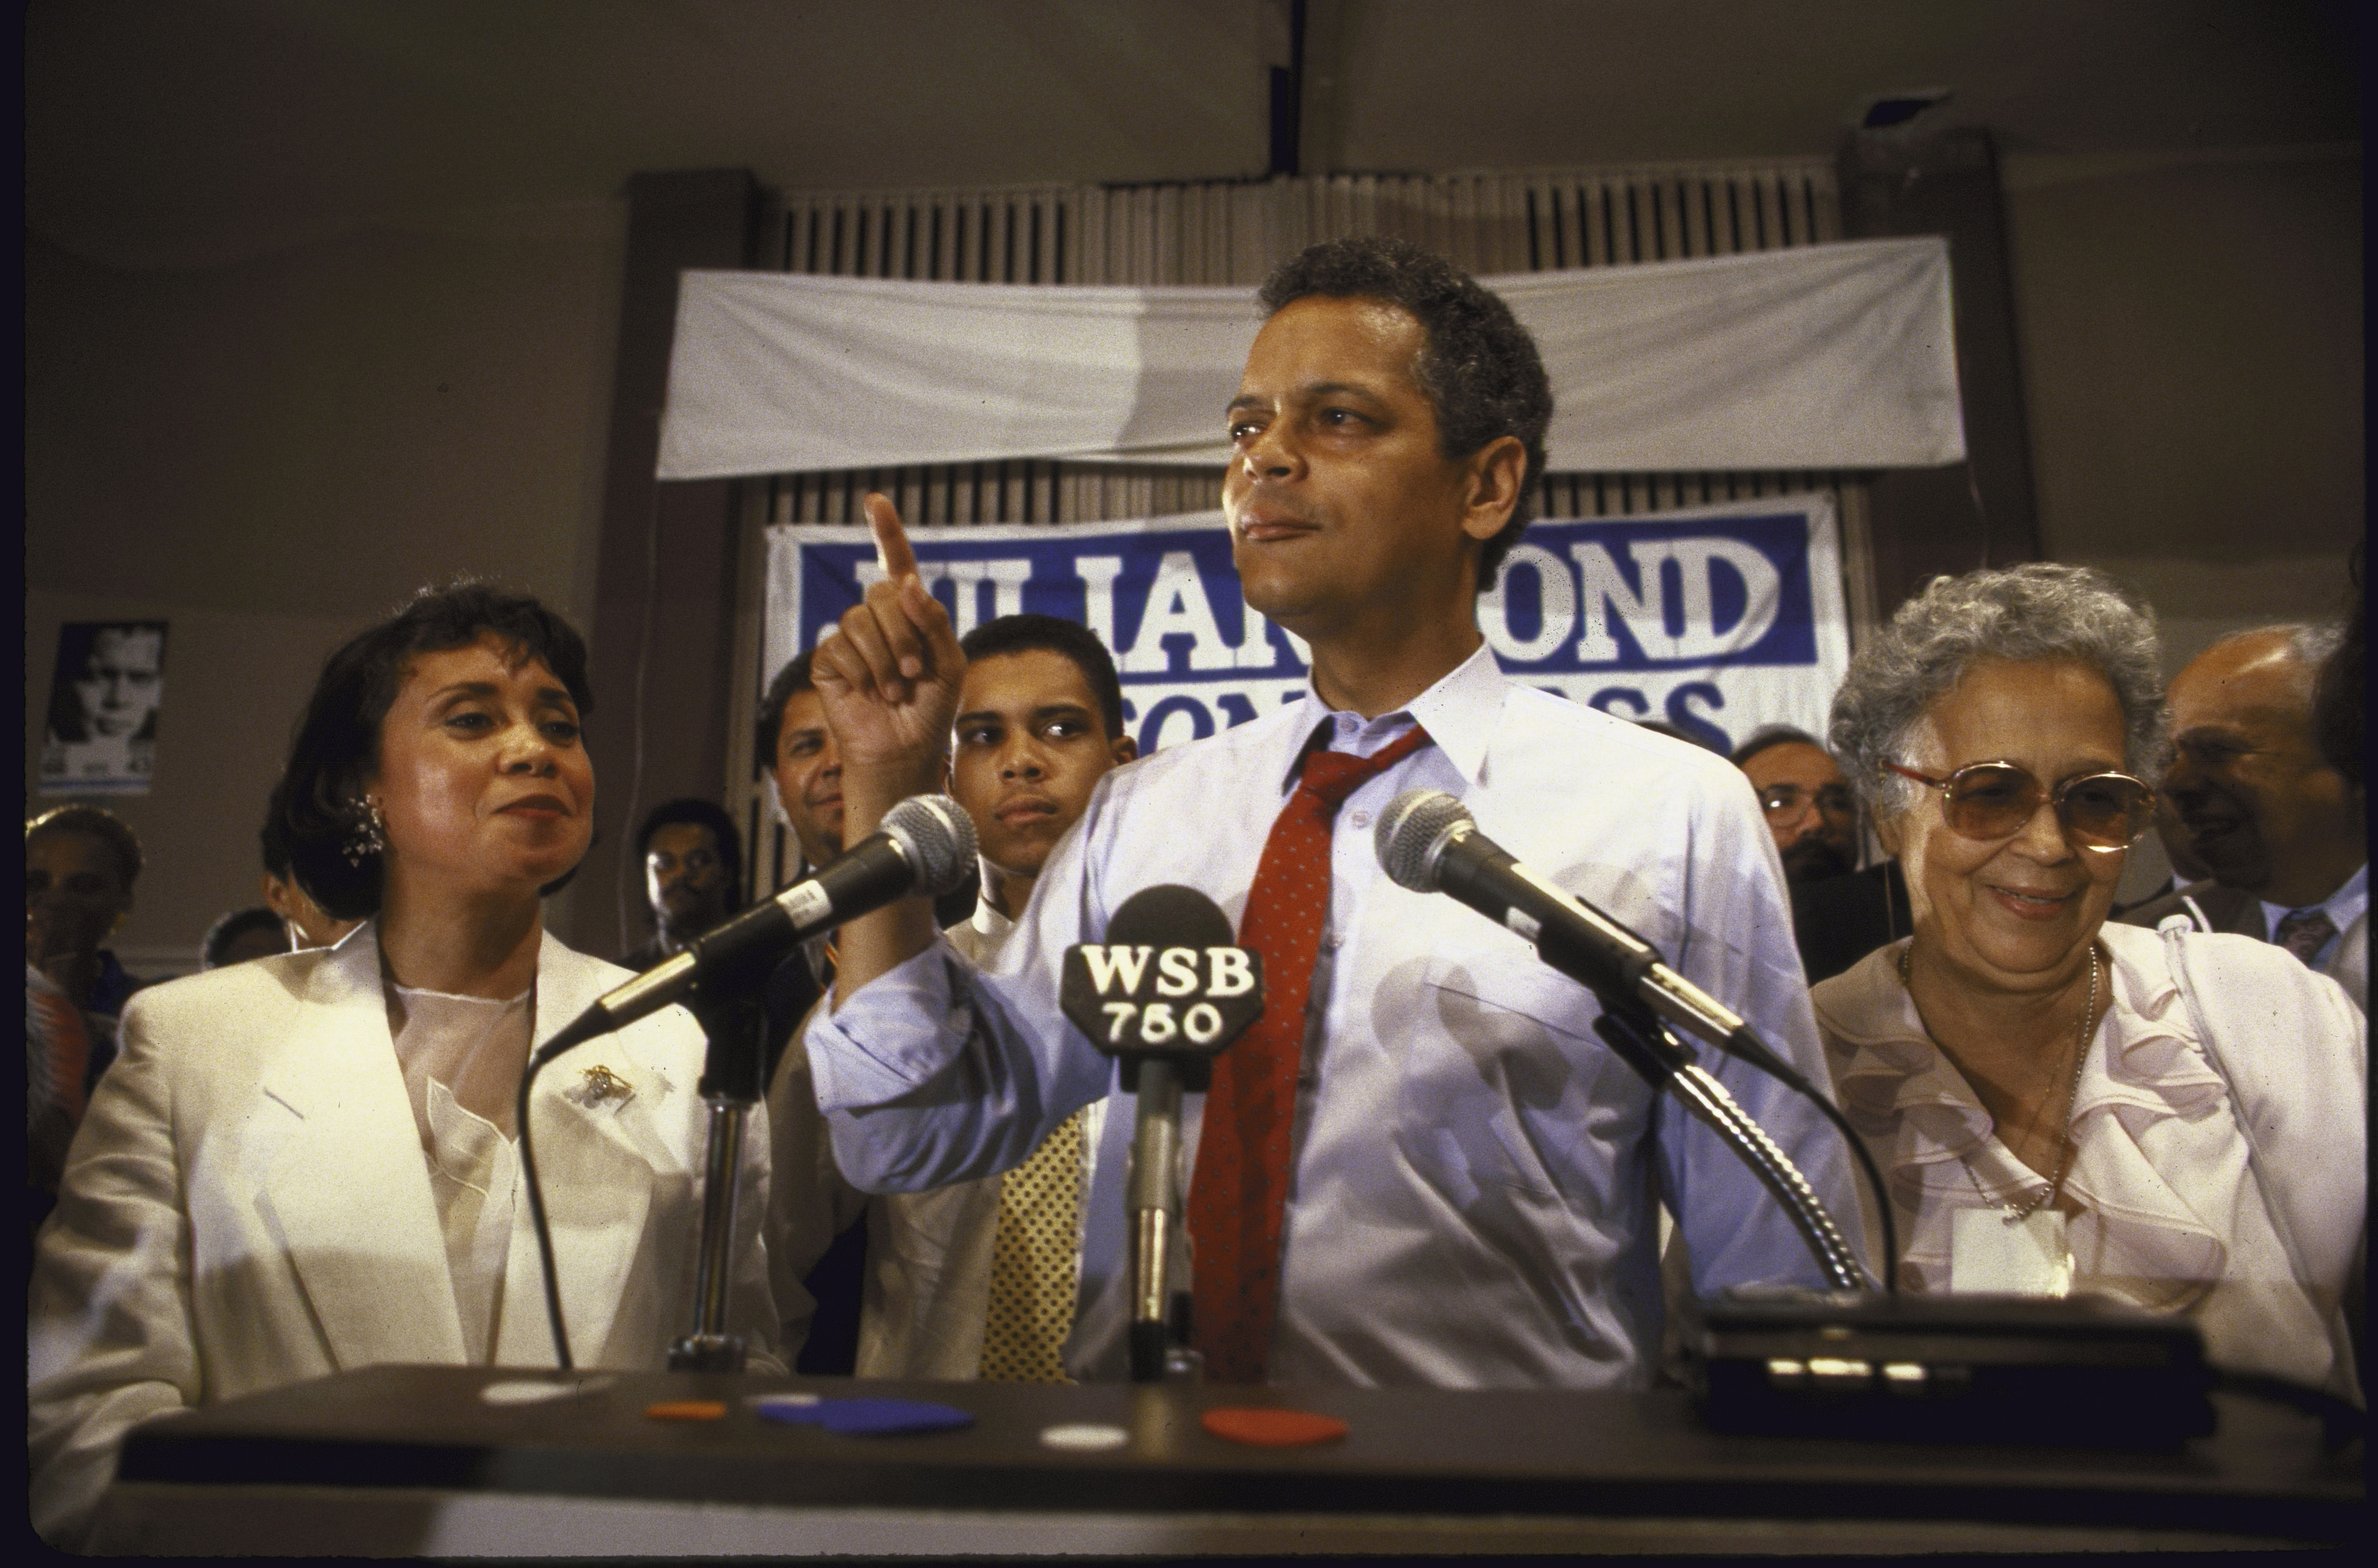 Congressional candidate Julian Bond flanked by his wife